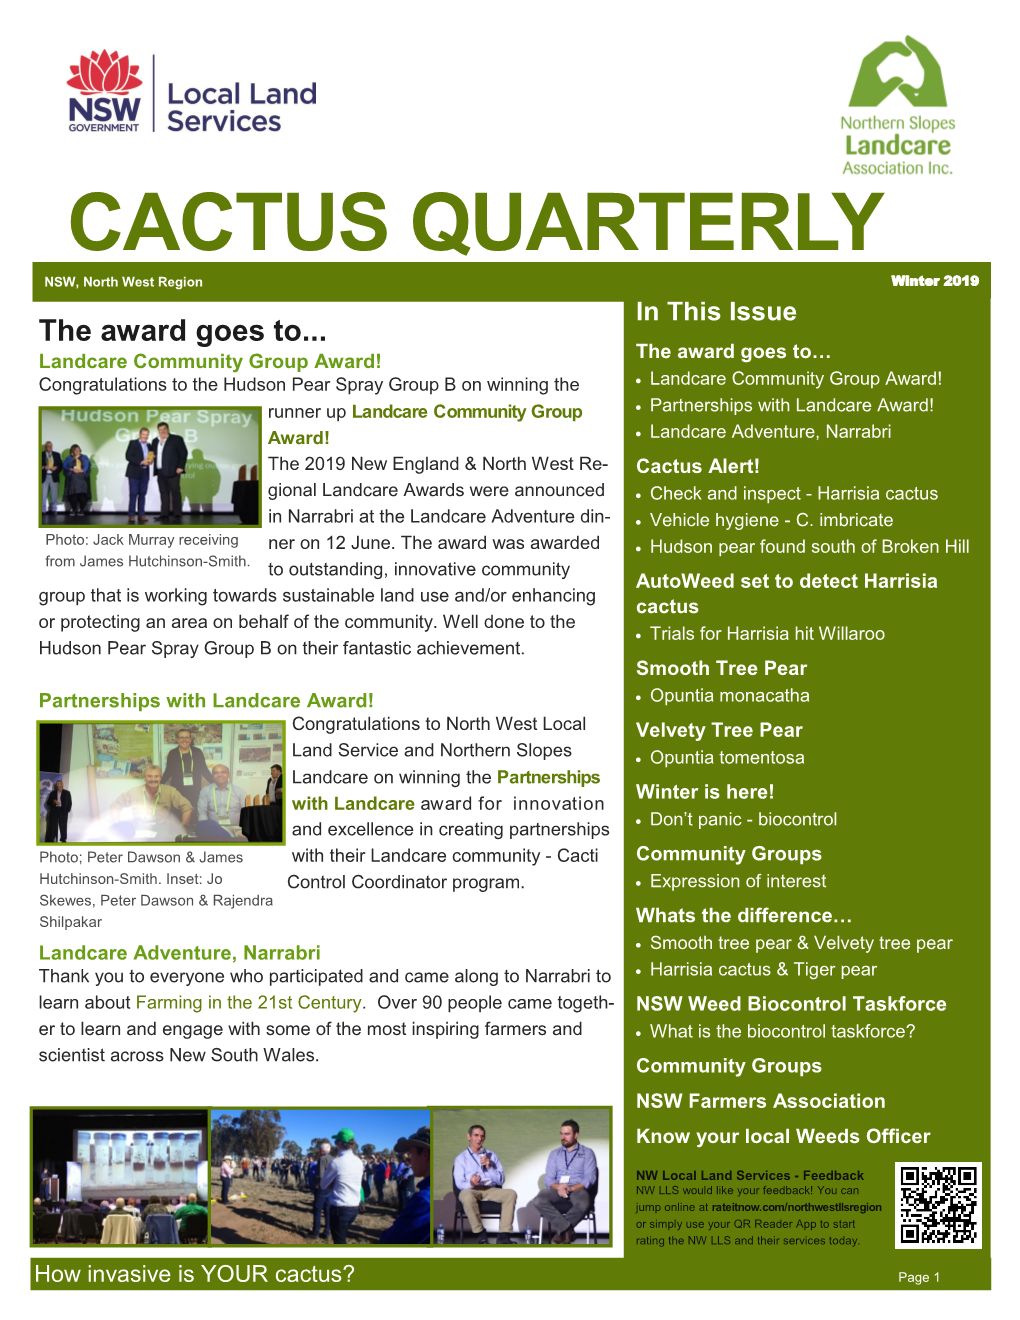 CACTUS QUARTERLY NSW, North West Region Winter 2019 in This Issue the Award Goes To